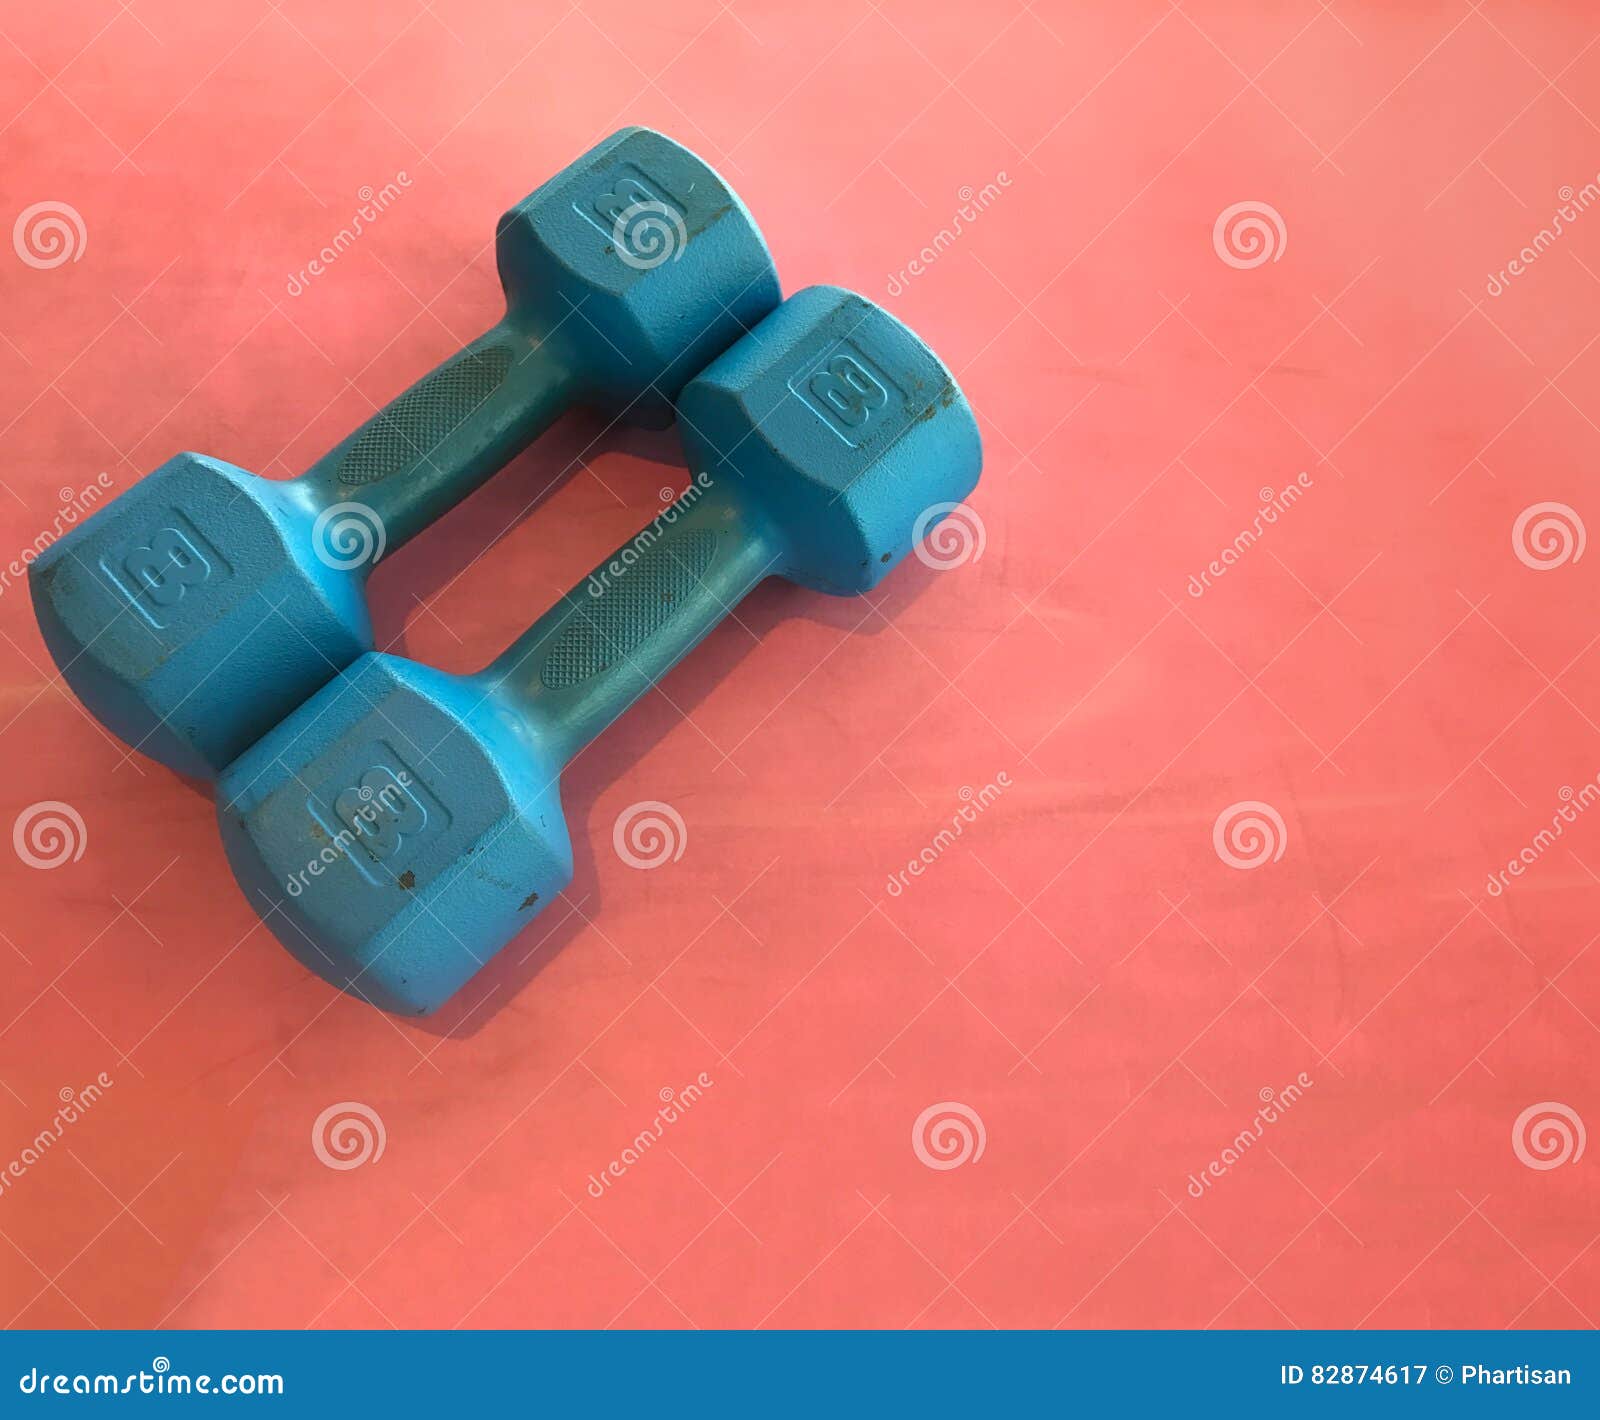 free weights on matt. health and fitness concept